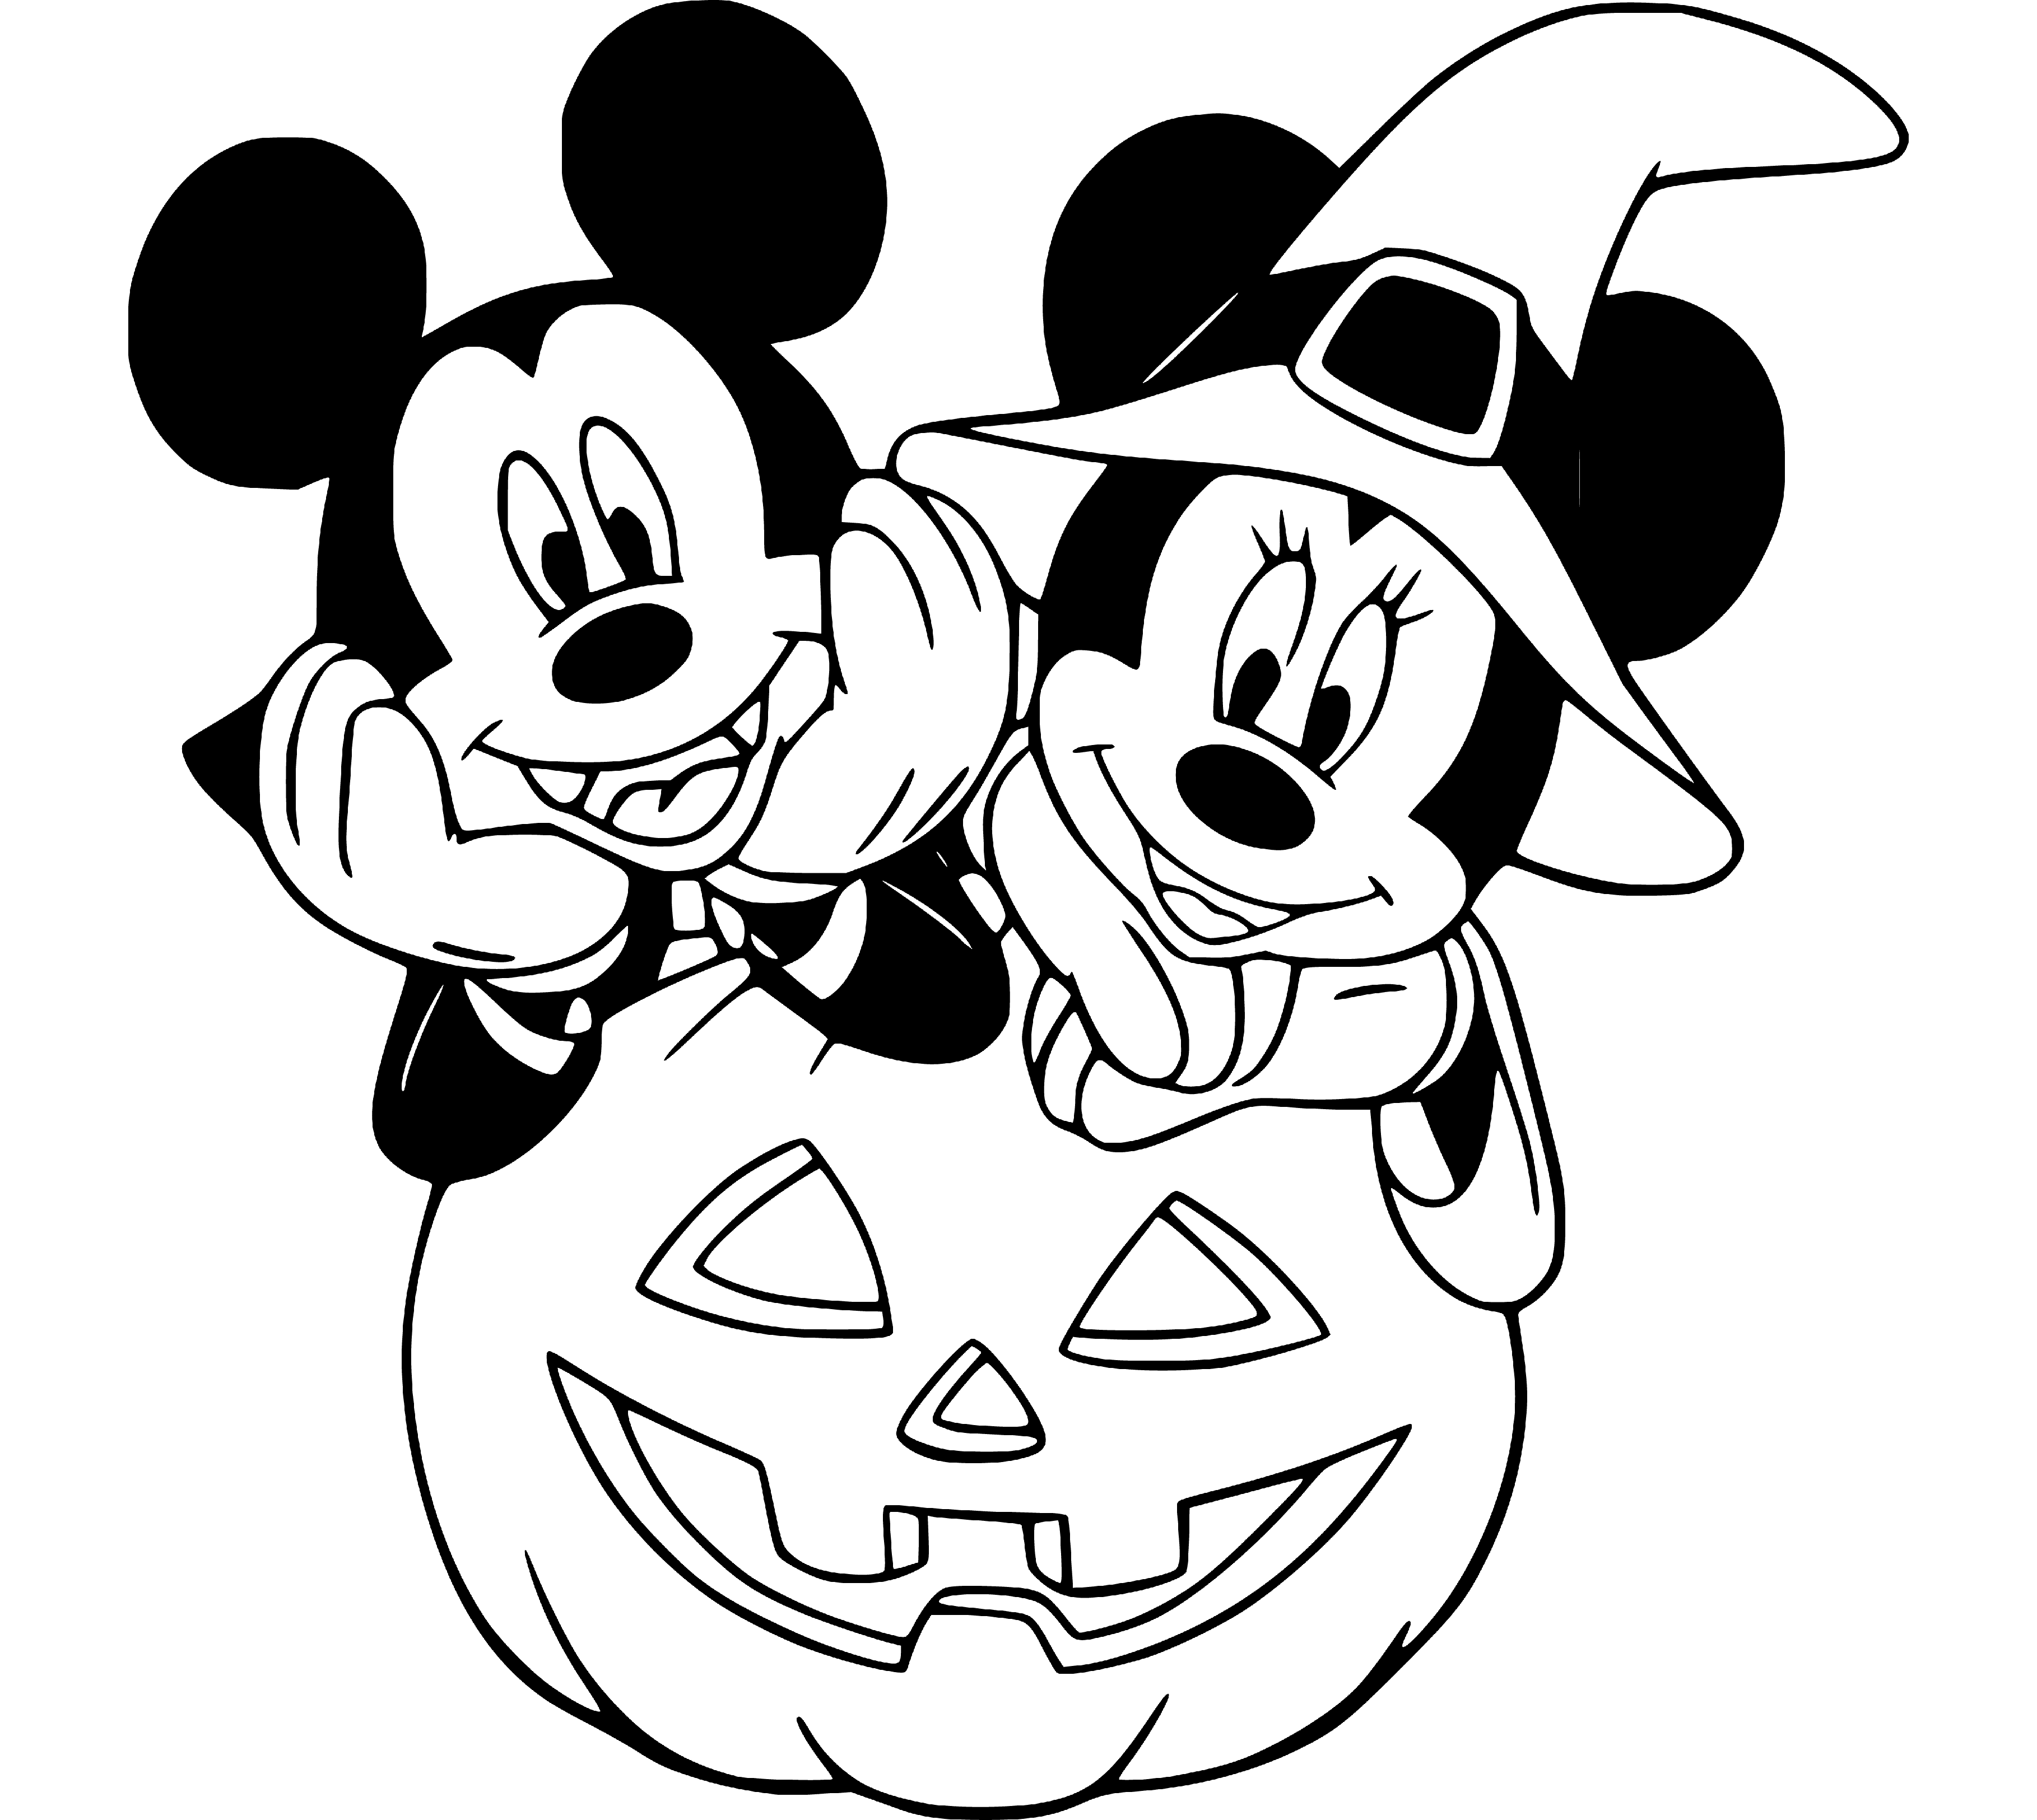 Printable Halloween Theme, Minnie Mouse and Mickey Mouse Coloring Page for kids.